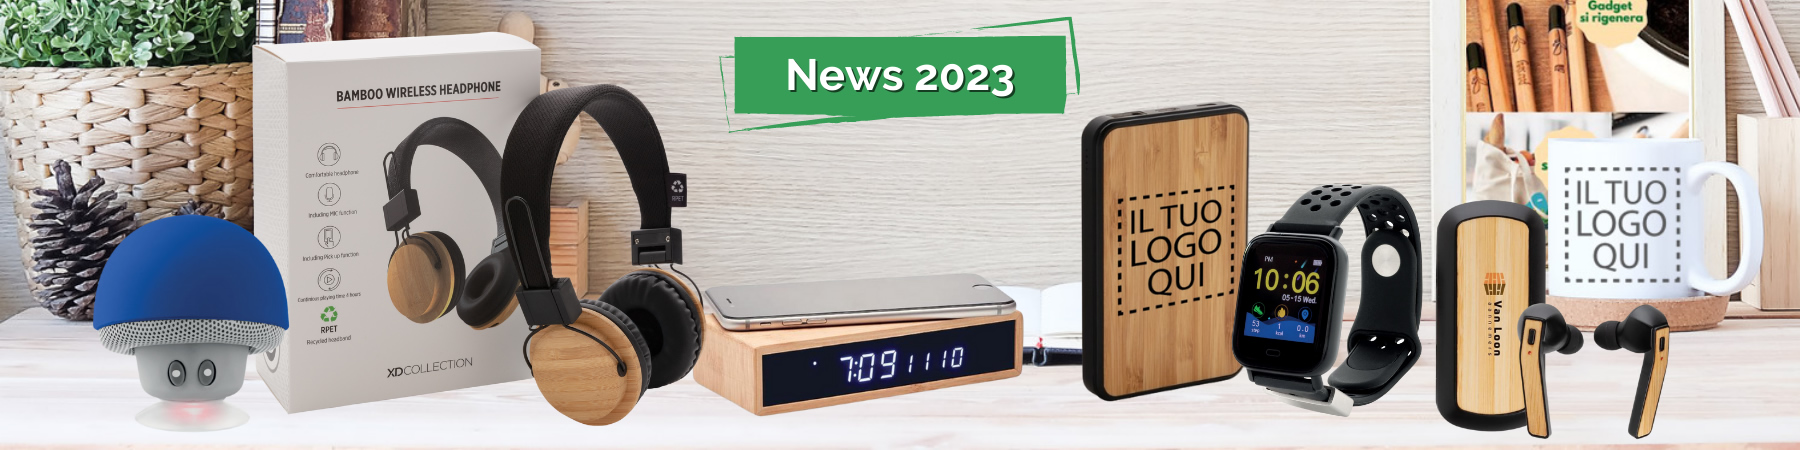 News 2023 Technological Gadgets with Logo Print